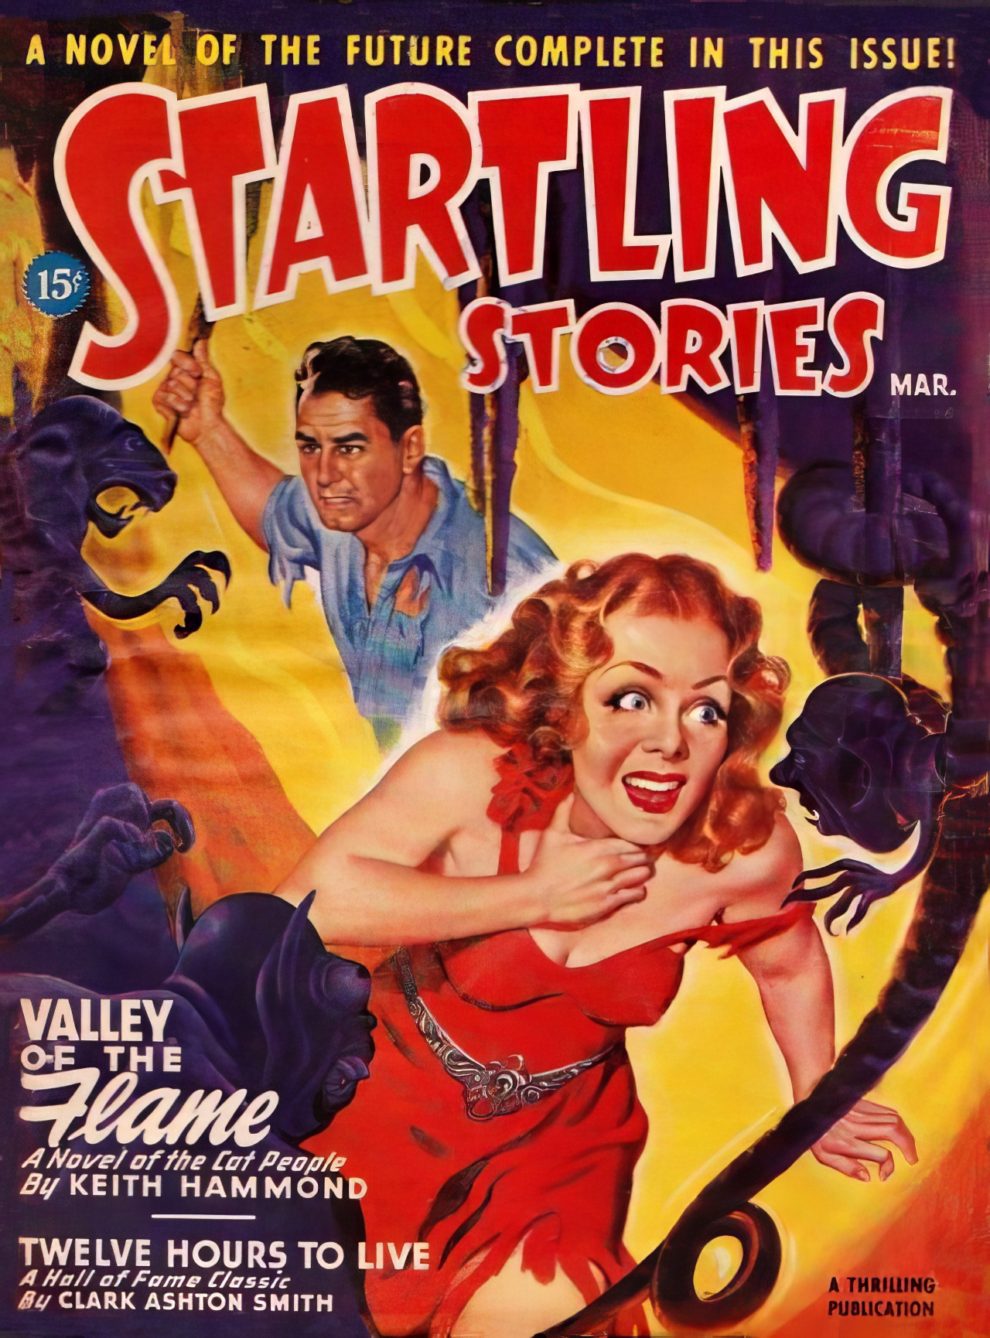 Startling Stories Covers 1940s 30 